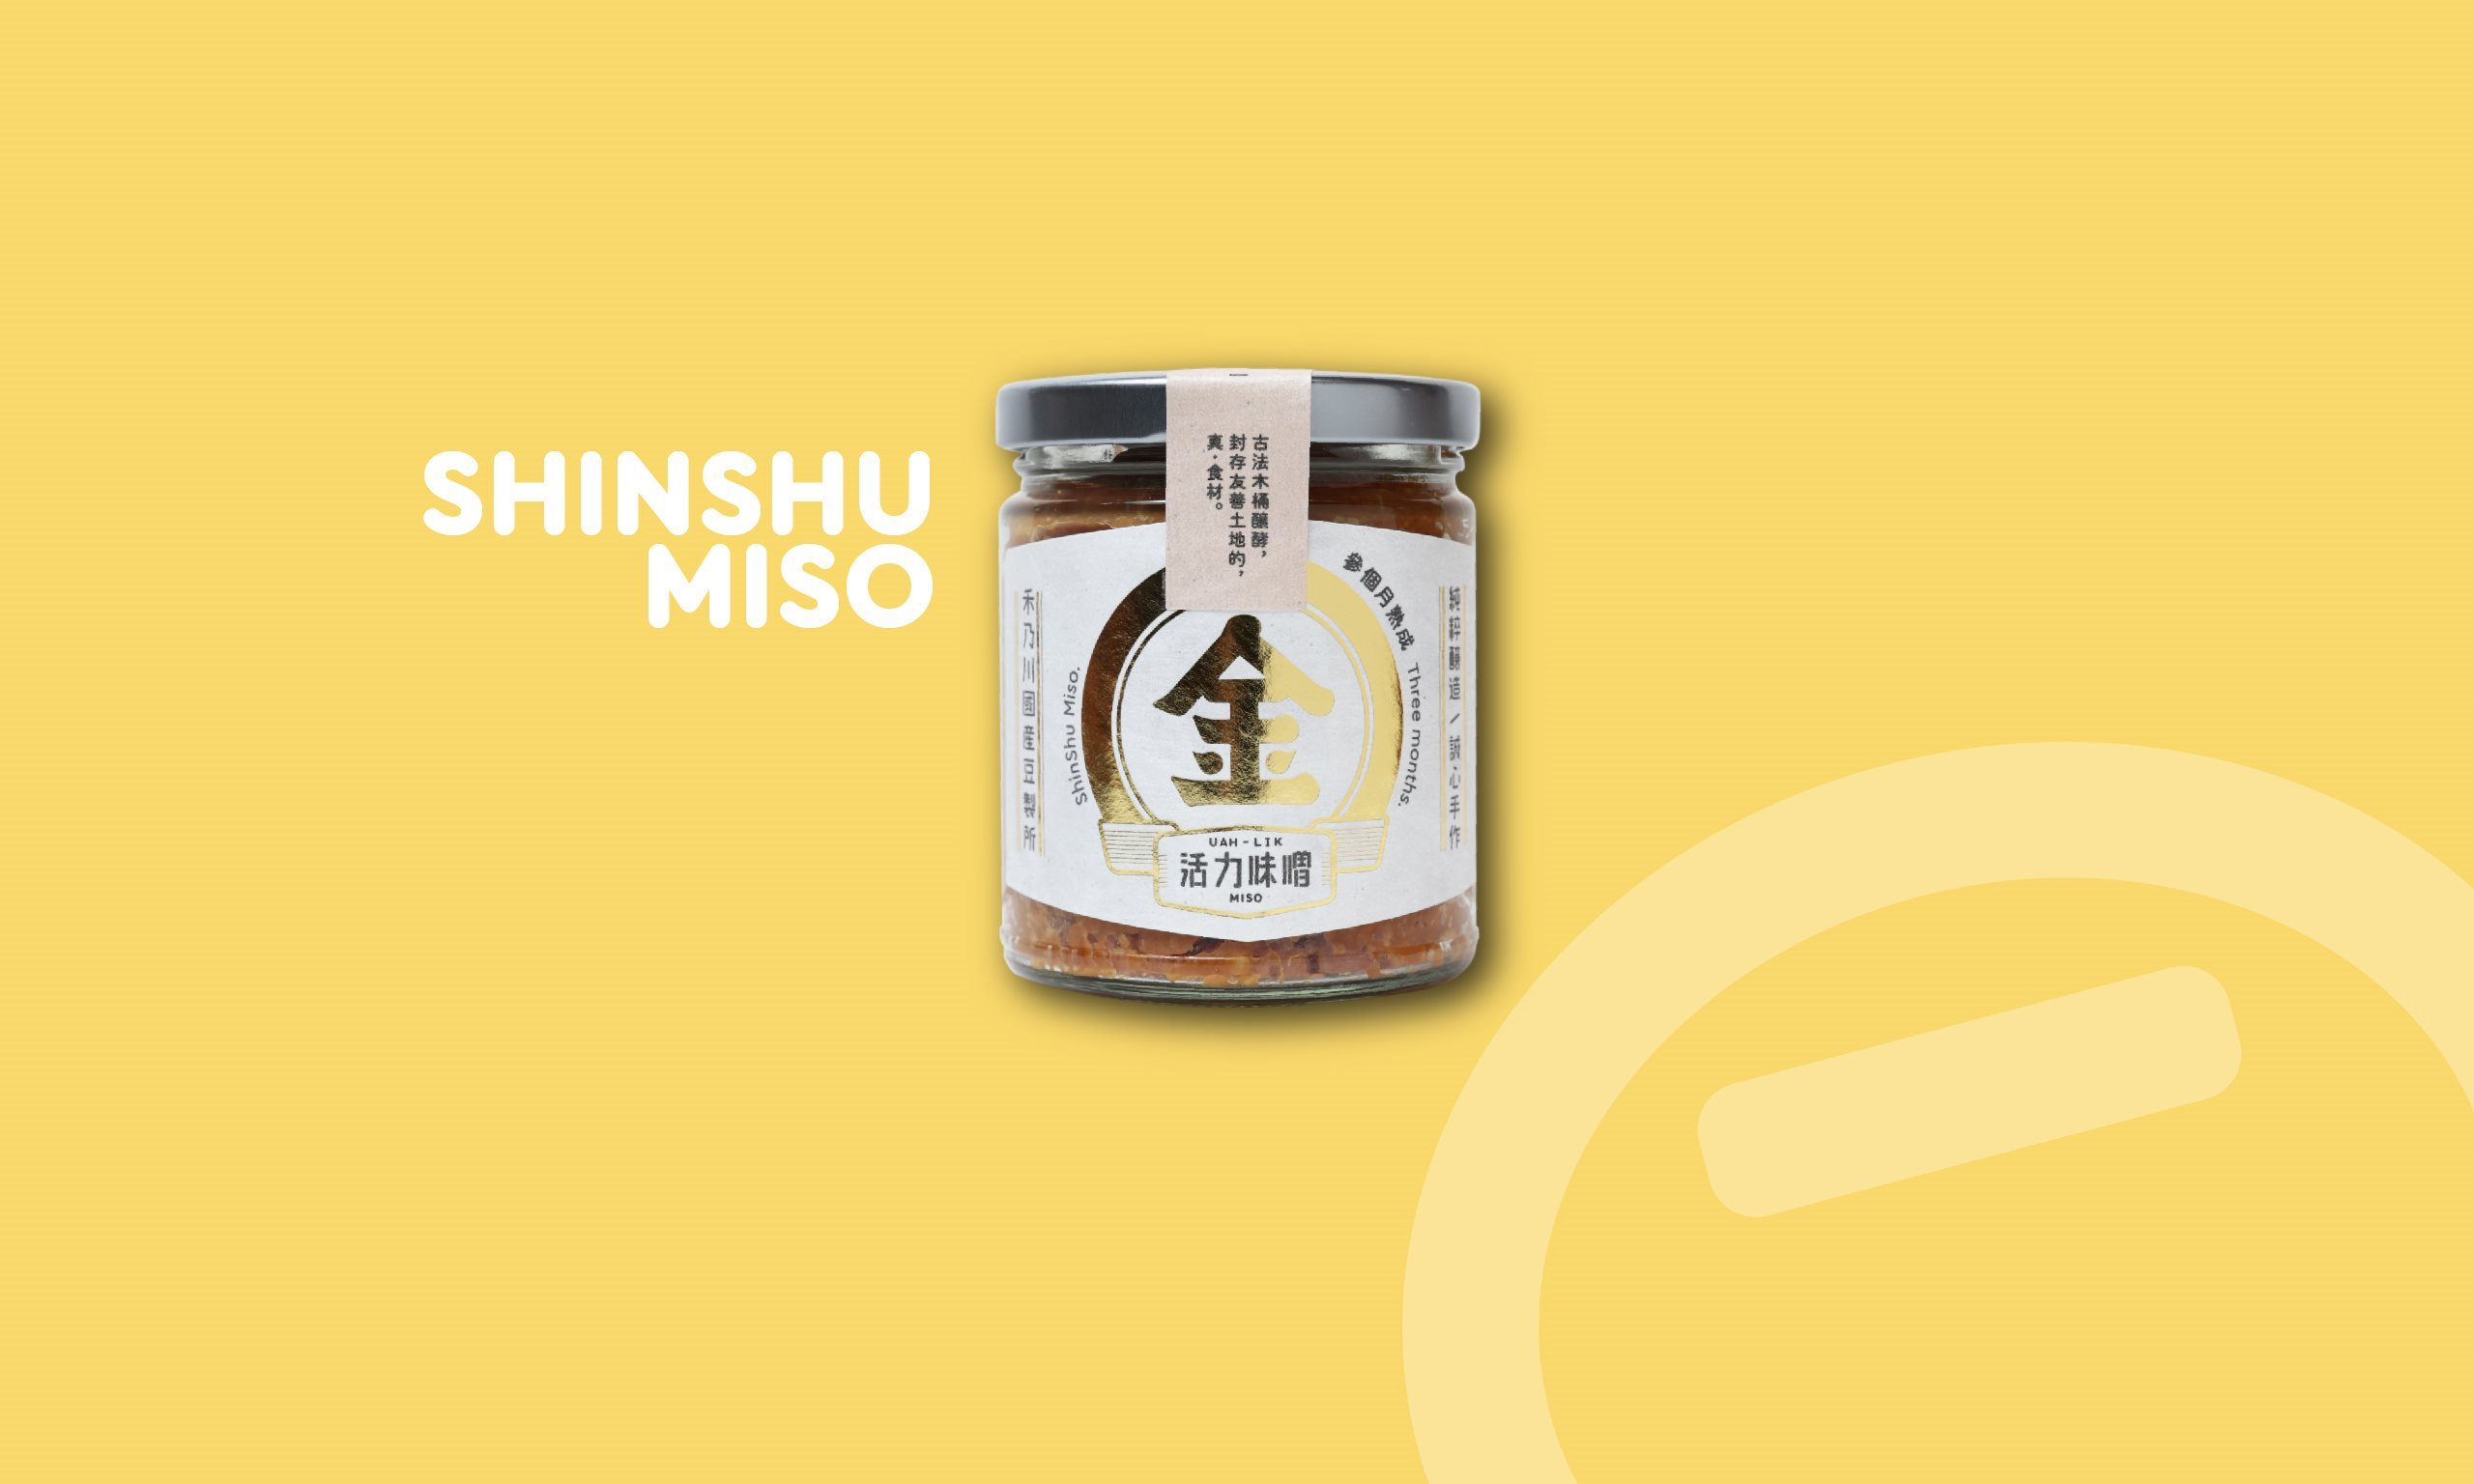 Shinshu Miso (3 Months Aged) - Taiwan handmade natural Miso sauce by experienced masters